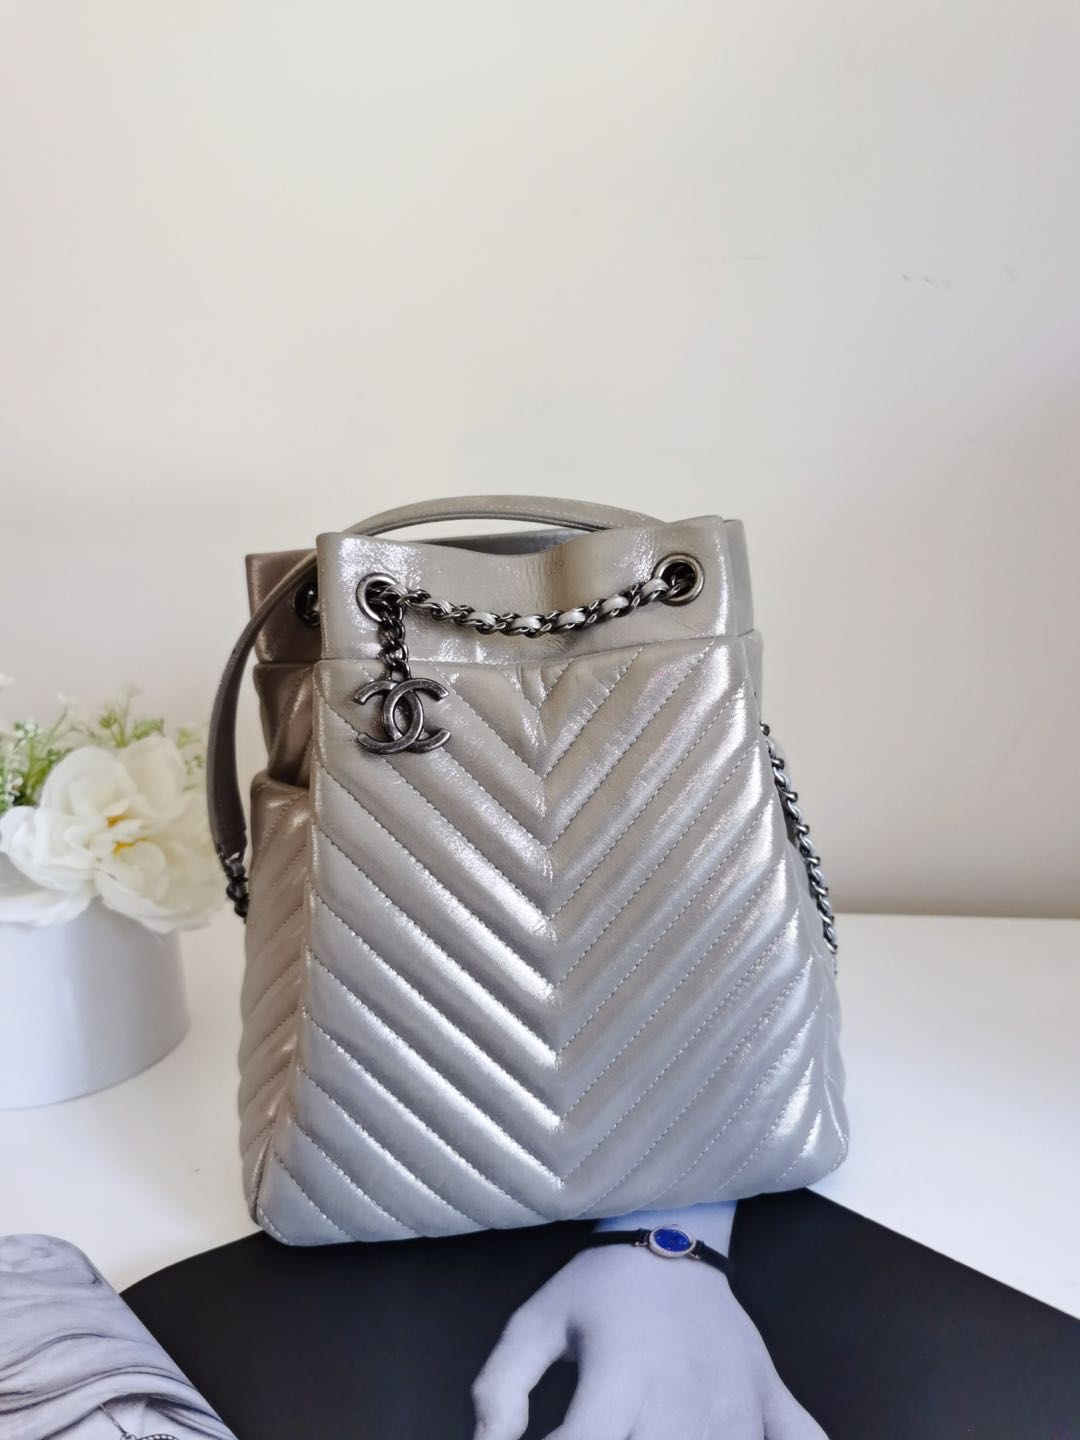 CHANEL SILVER METALLIC CHEVRON QUILTED CALFSKIN LEATHER SMALL BUCKET BAG - luxhub.ca